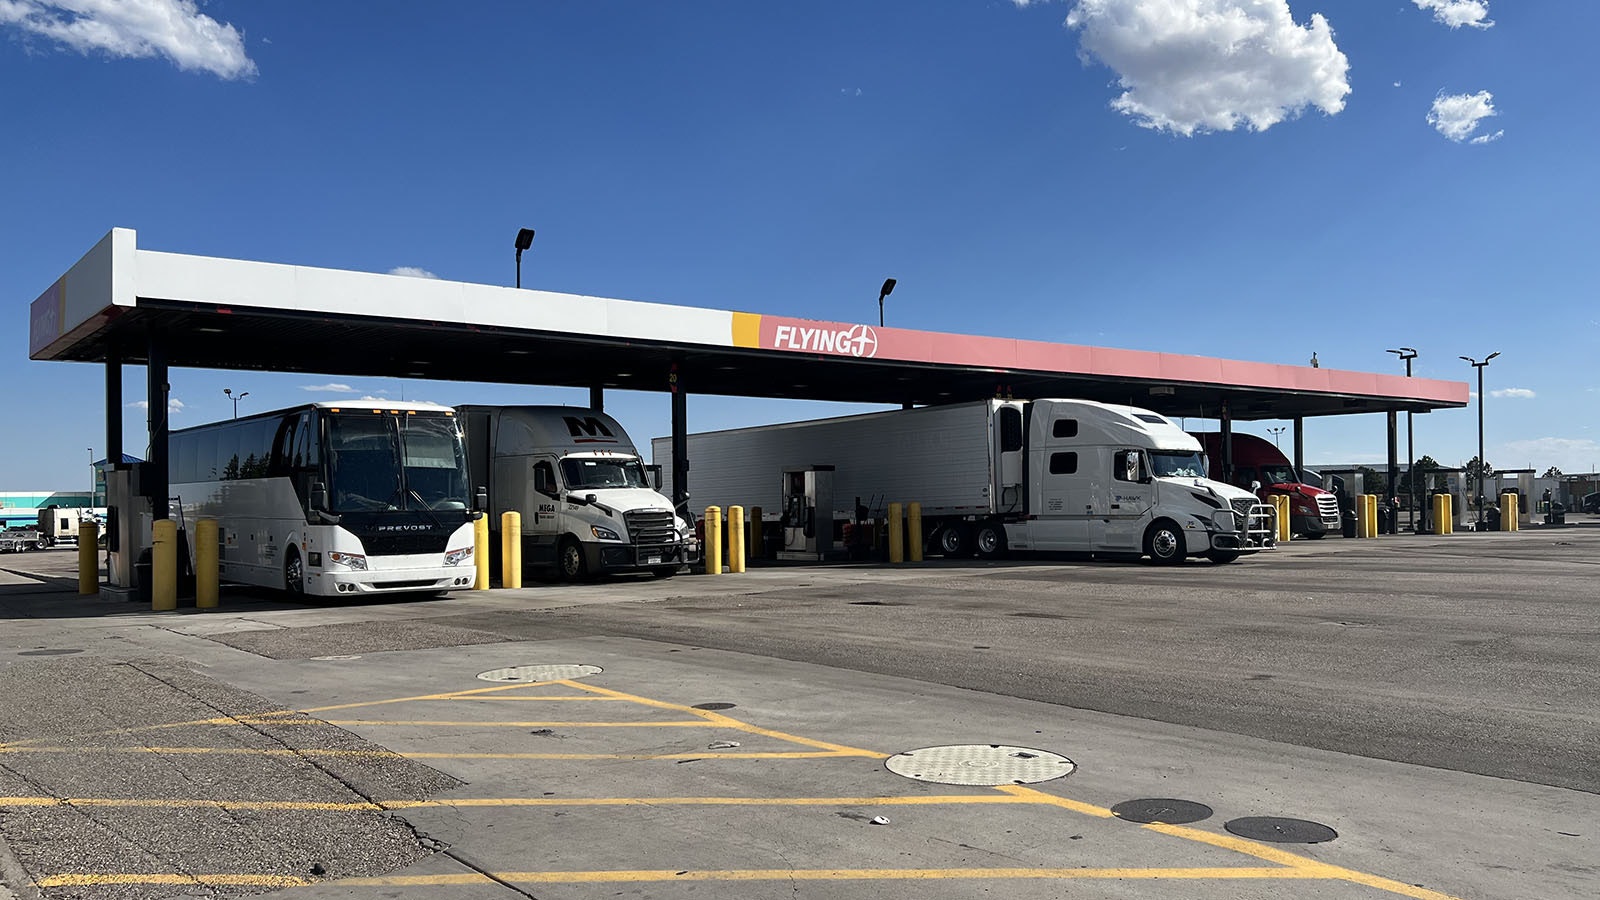 Wyoming truckers say new federal regulations designed to convert their industry to EVs aren't realistic and could hurt smaller companies.